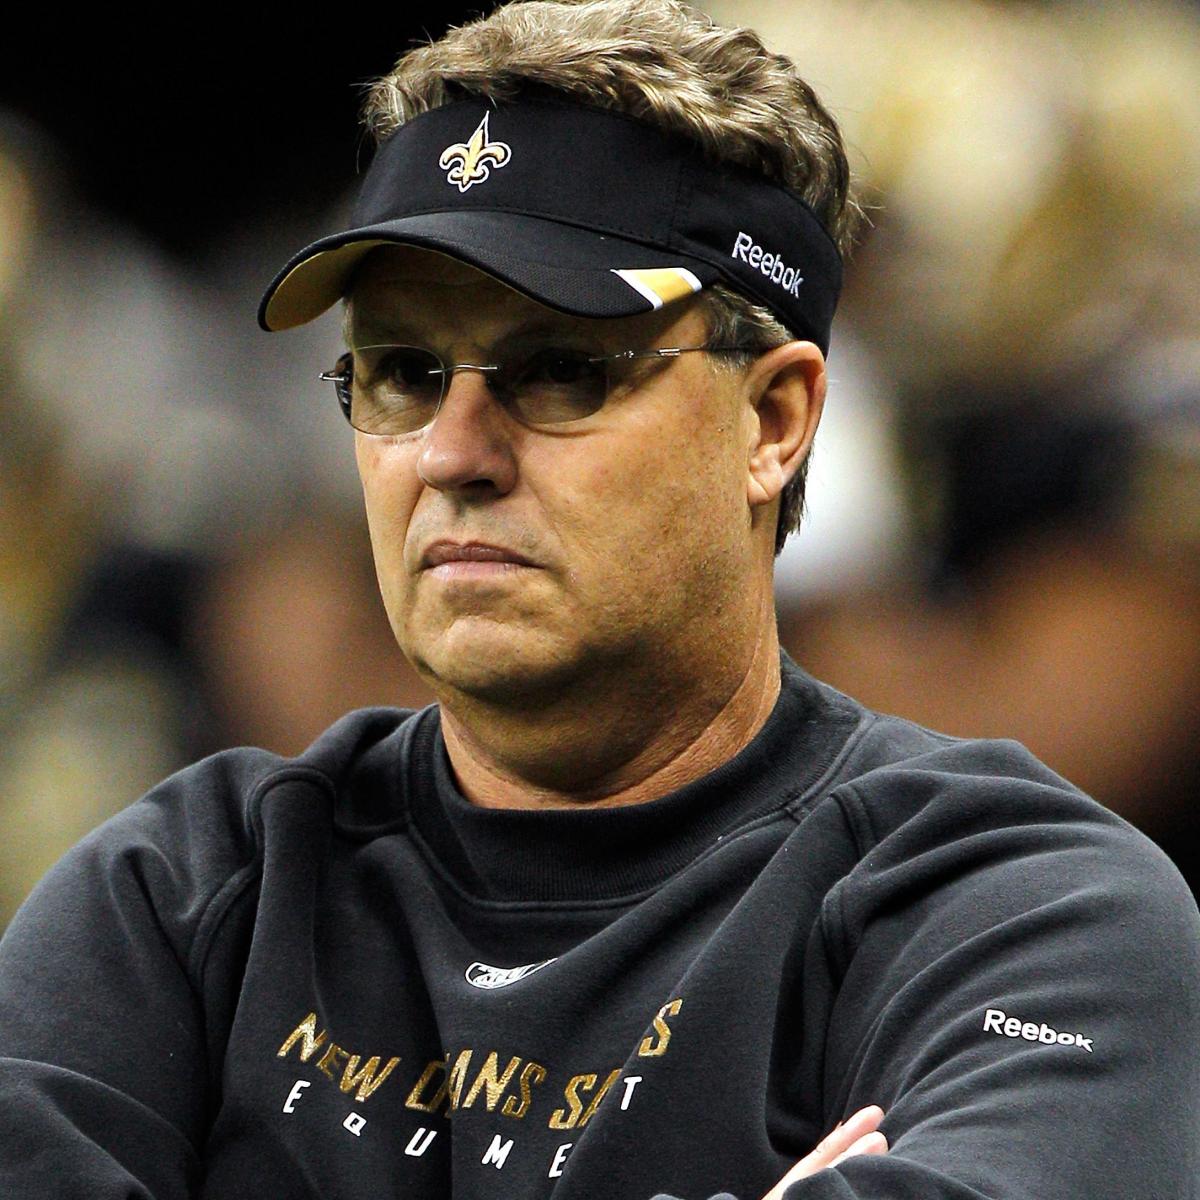 Saints Bounty Scandal Is Gregg Williams A Rogue Coach Or A Scapegoat Bleacher Report Latest News Videos And Highlights